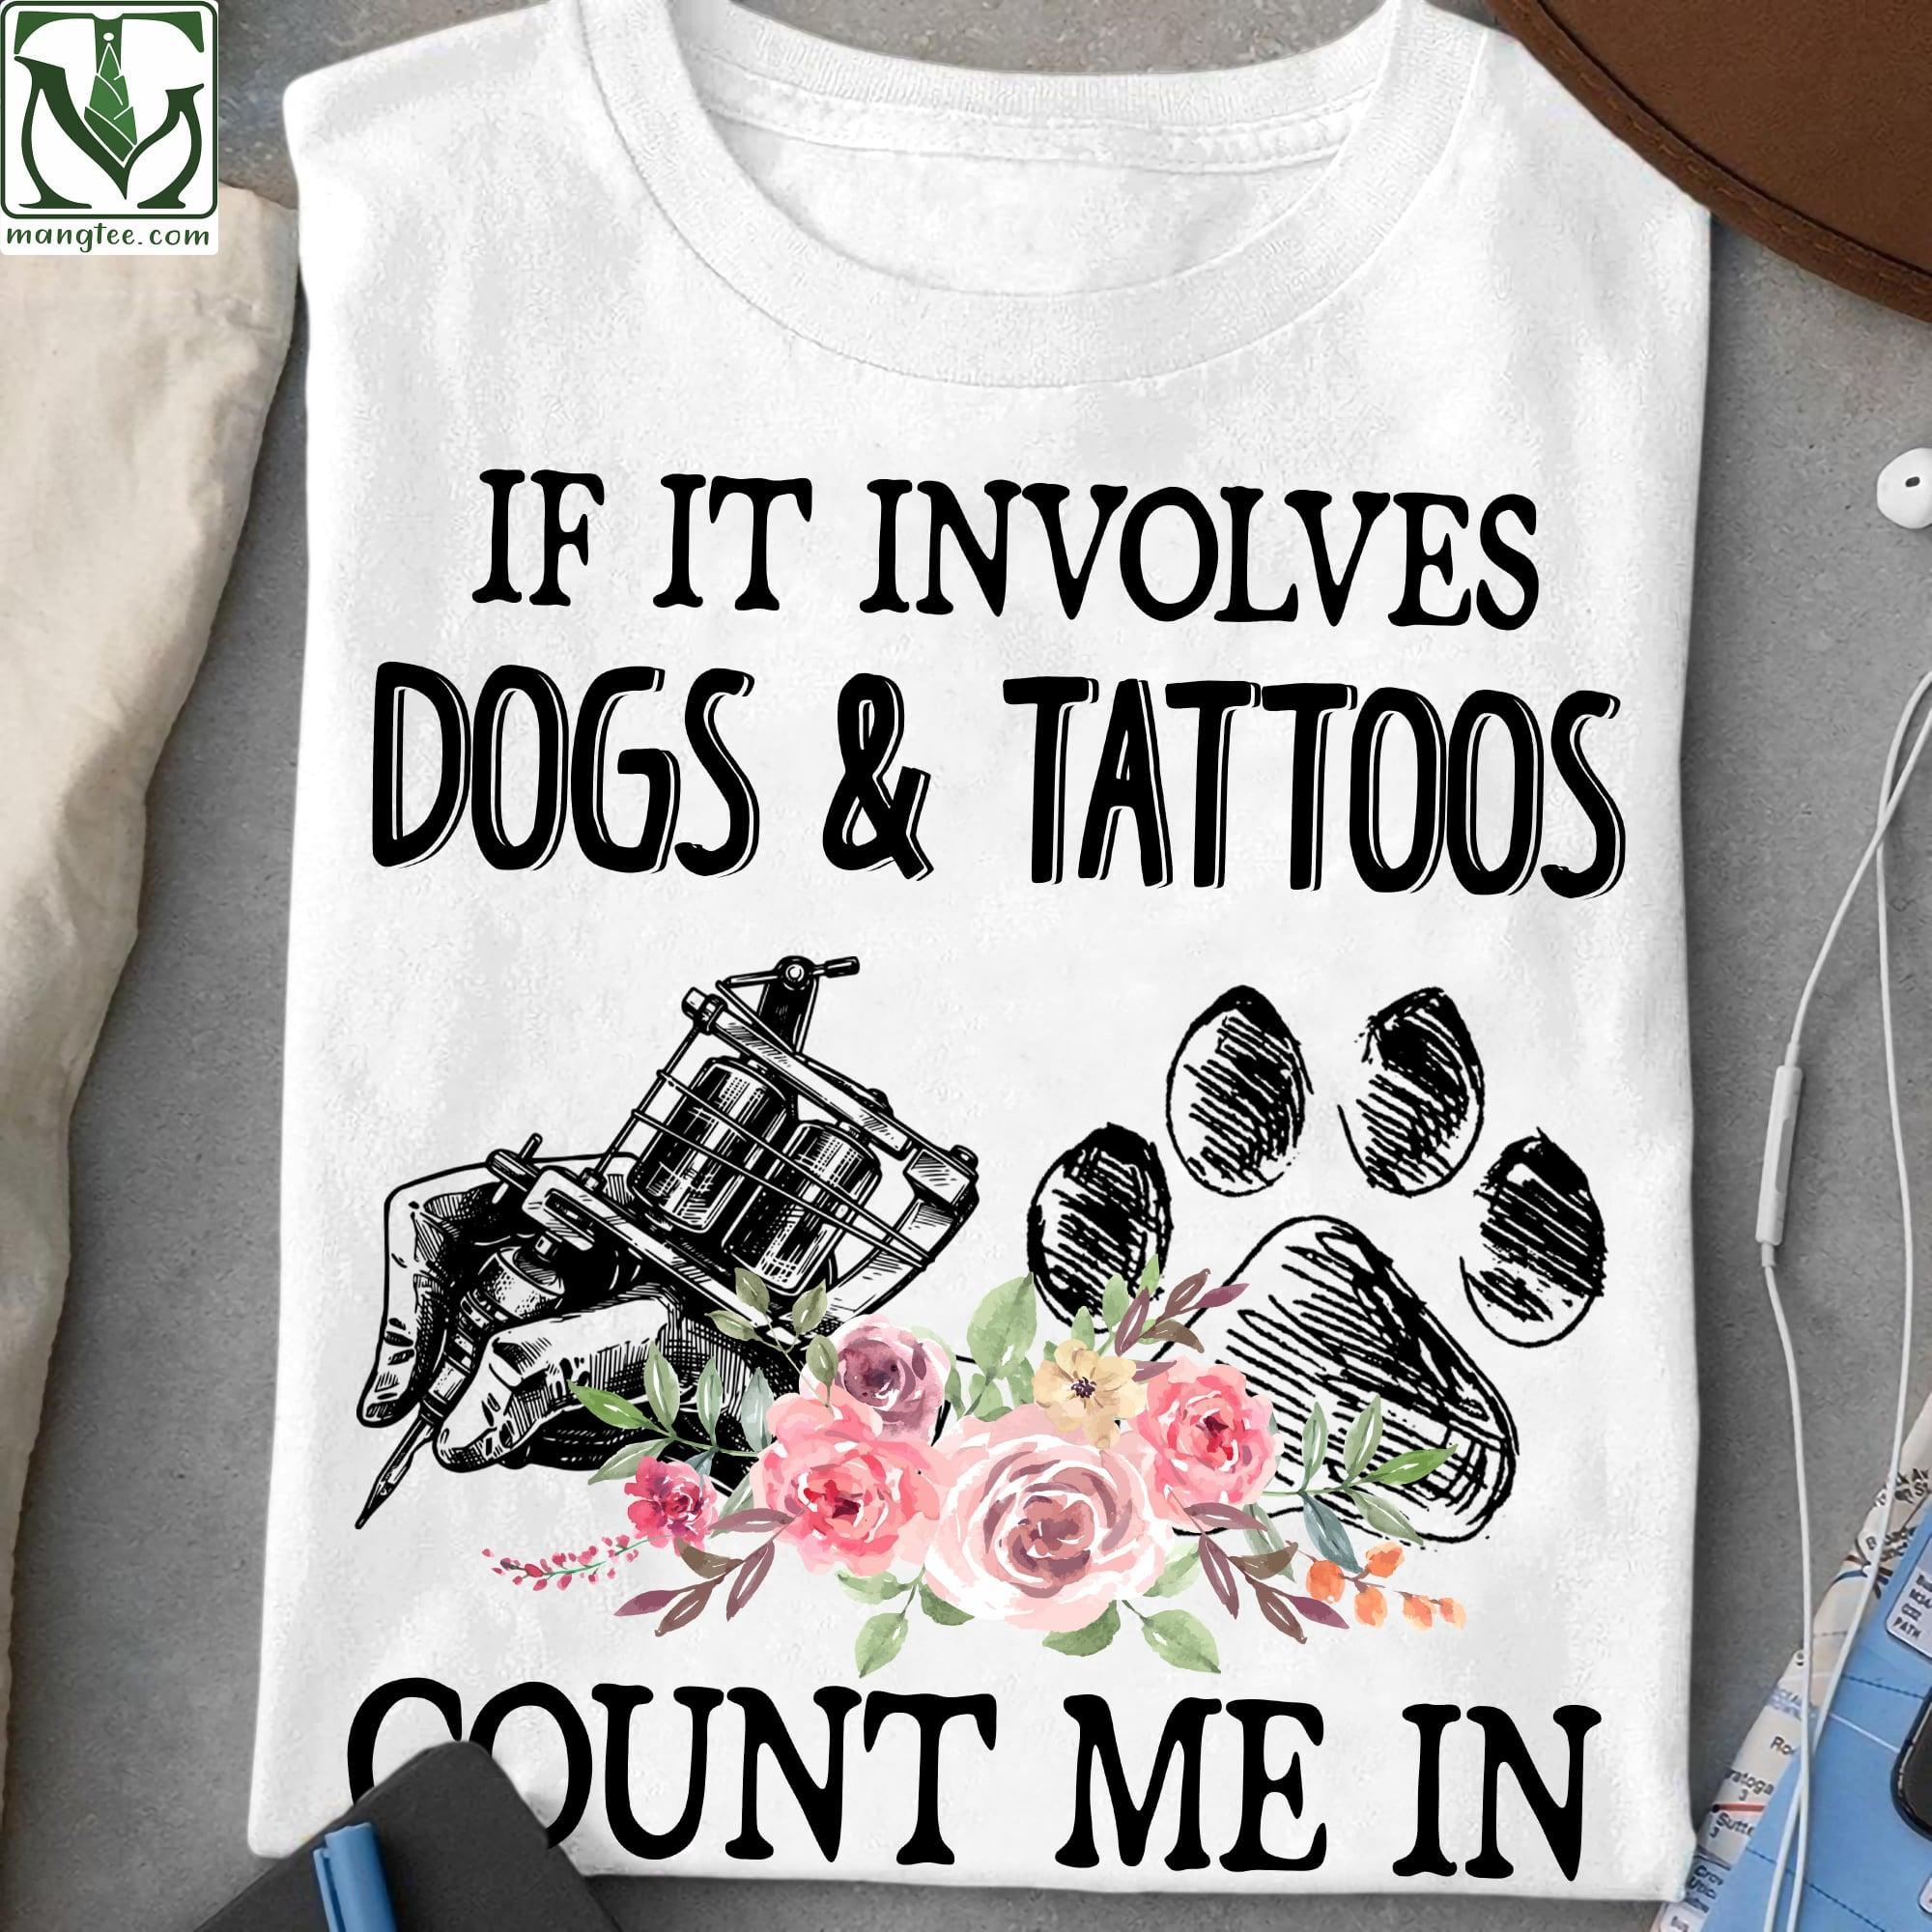 If it involves dogs and tattoos count me in - Dog footprint, gift for tattooed people